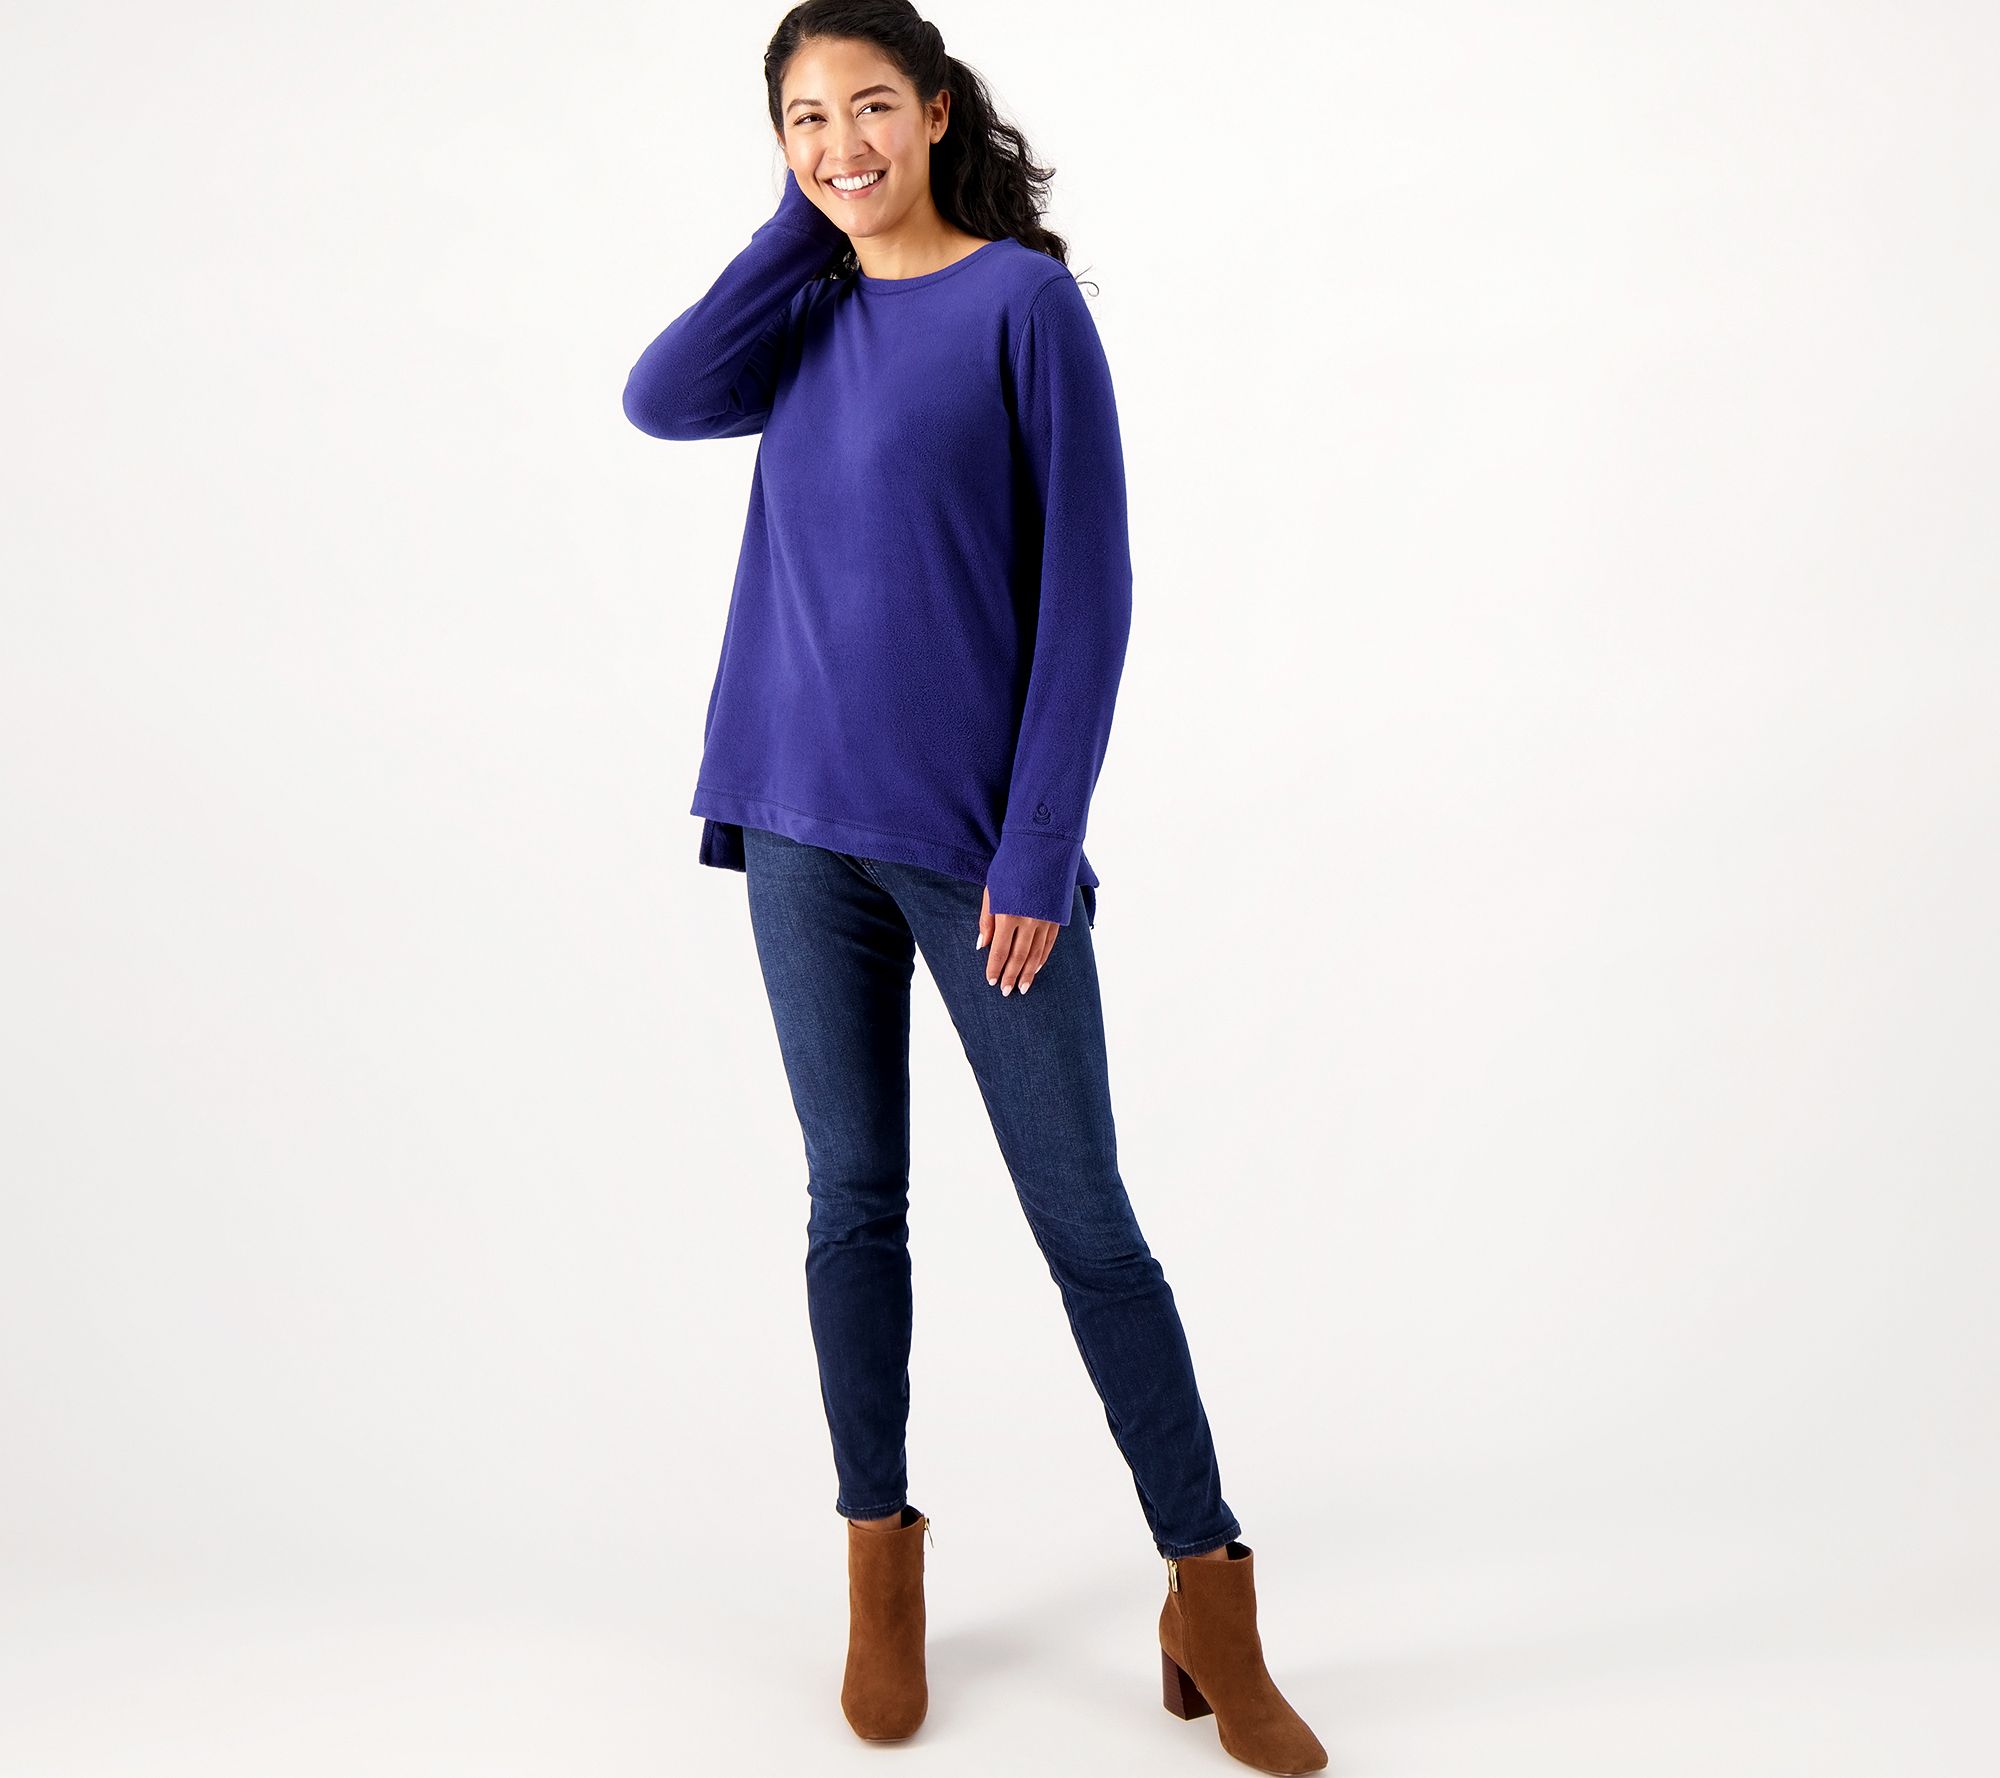 Cuddl Duds Fleecewear with Stretch Crew Neck Tops Set of Two - QVC.com